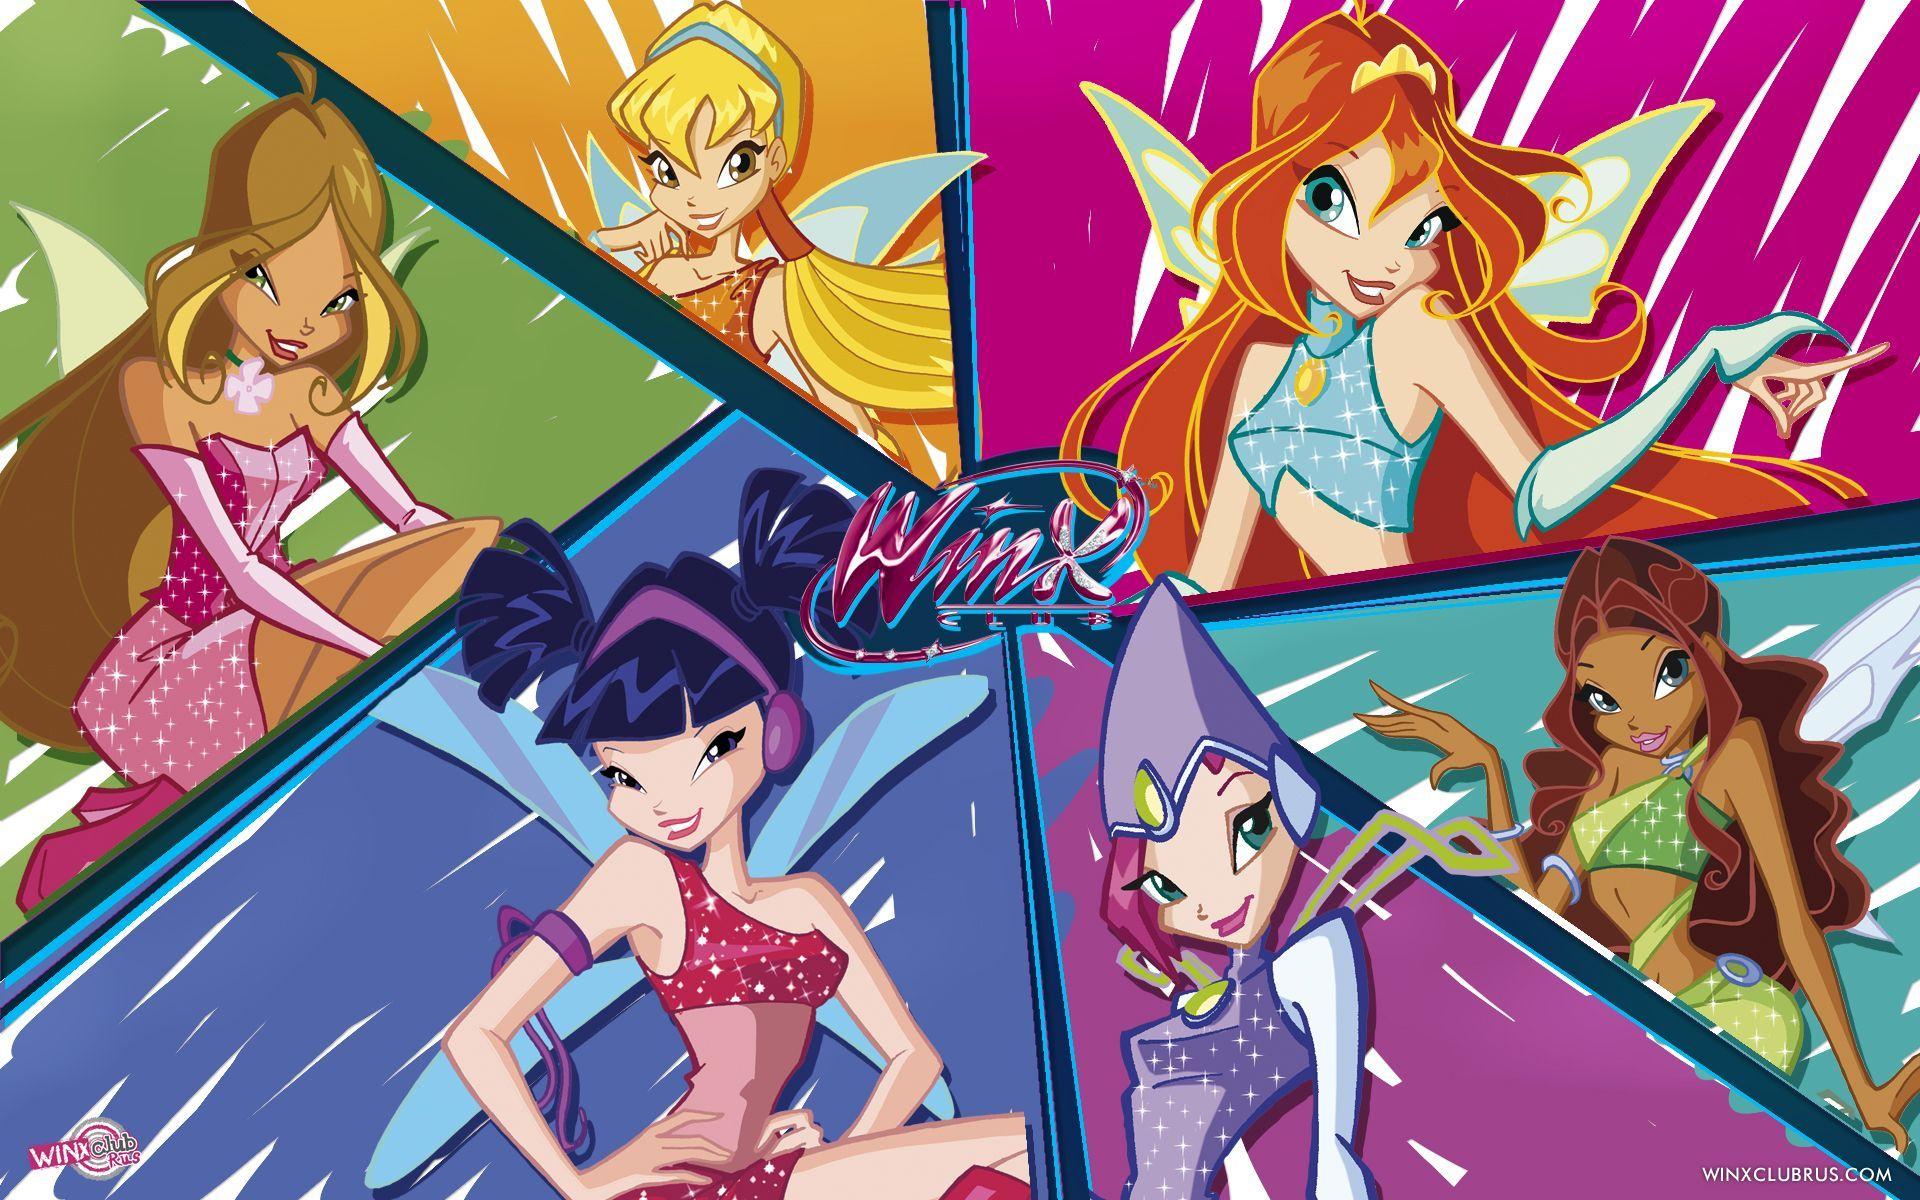 Winx Club Wallpapers Top Free Winx Club Backgrounds Wallpaperaccess 